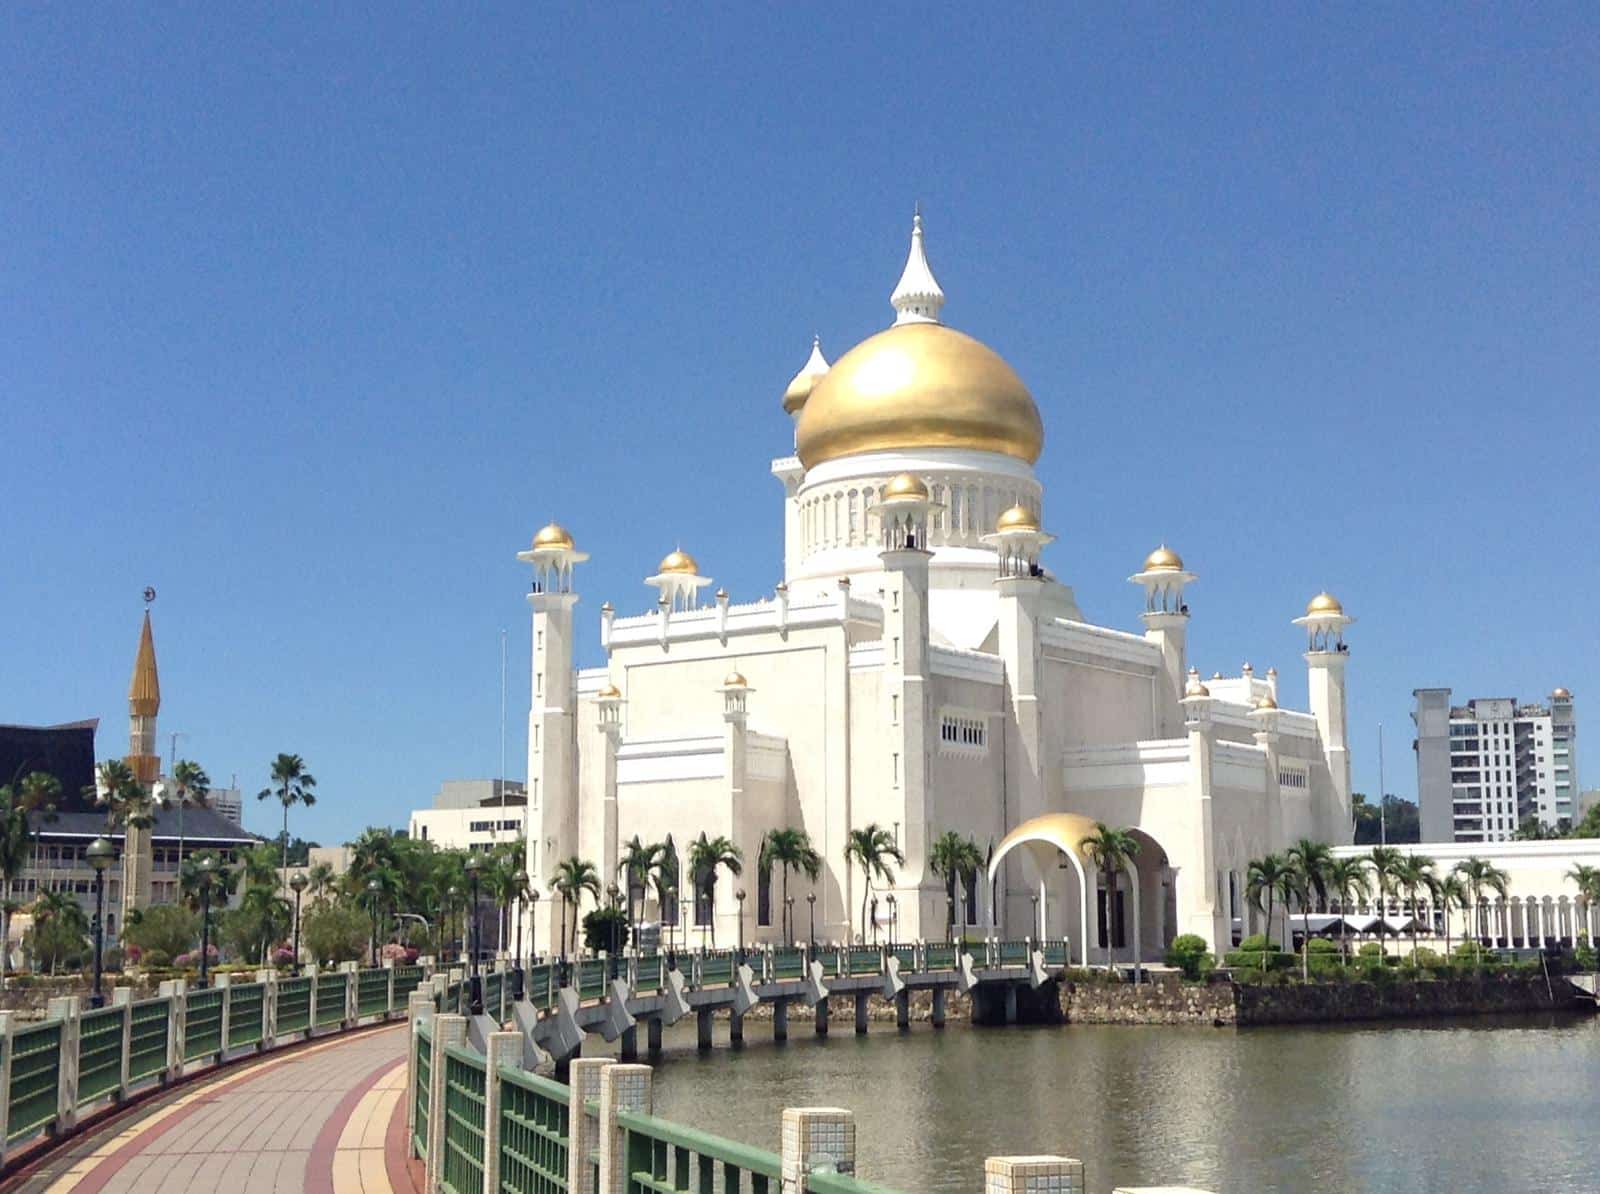 The white Omar Ali Saifuddien Mosque in Brunei's capital Bandar Seri Begawan, famous for its golden dome. There is a curved walkway to the mosque with a small lake alongside it.